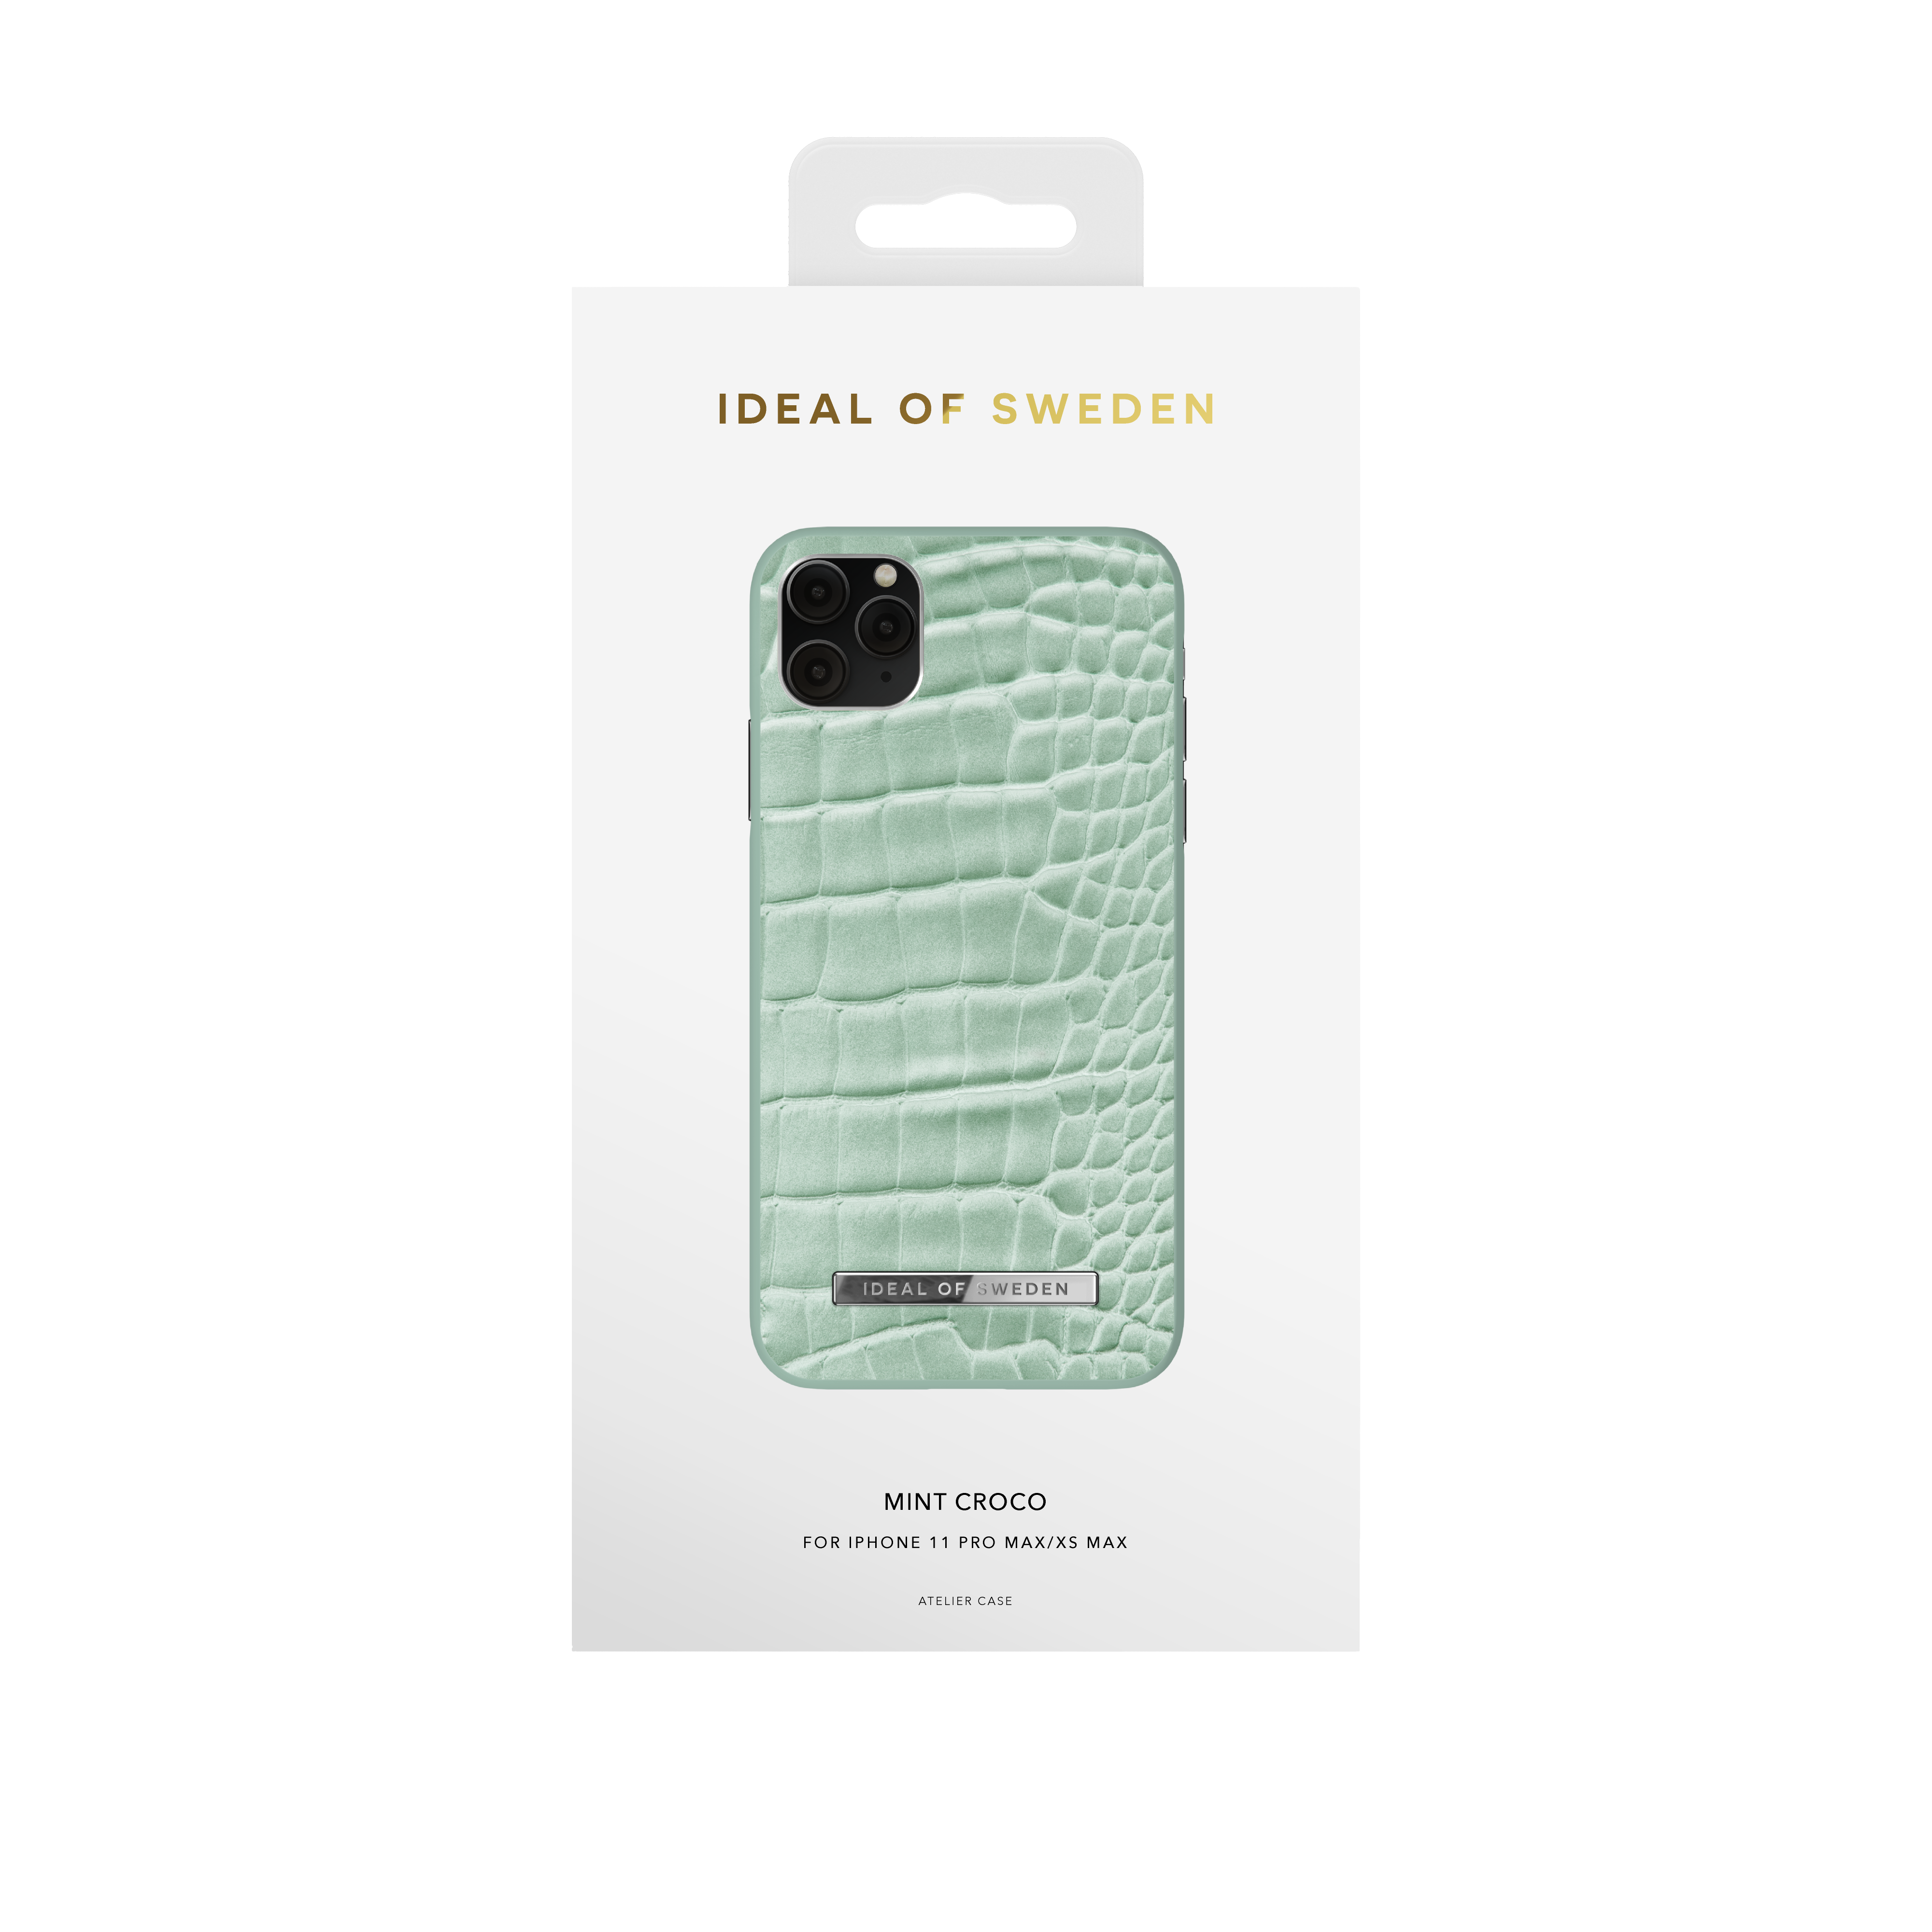 Mint 11, IDACSS21-I1961-261, OF Backcover, Croco iPhone SWEDEN IDEAL XR, Apple, iPhone